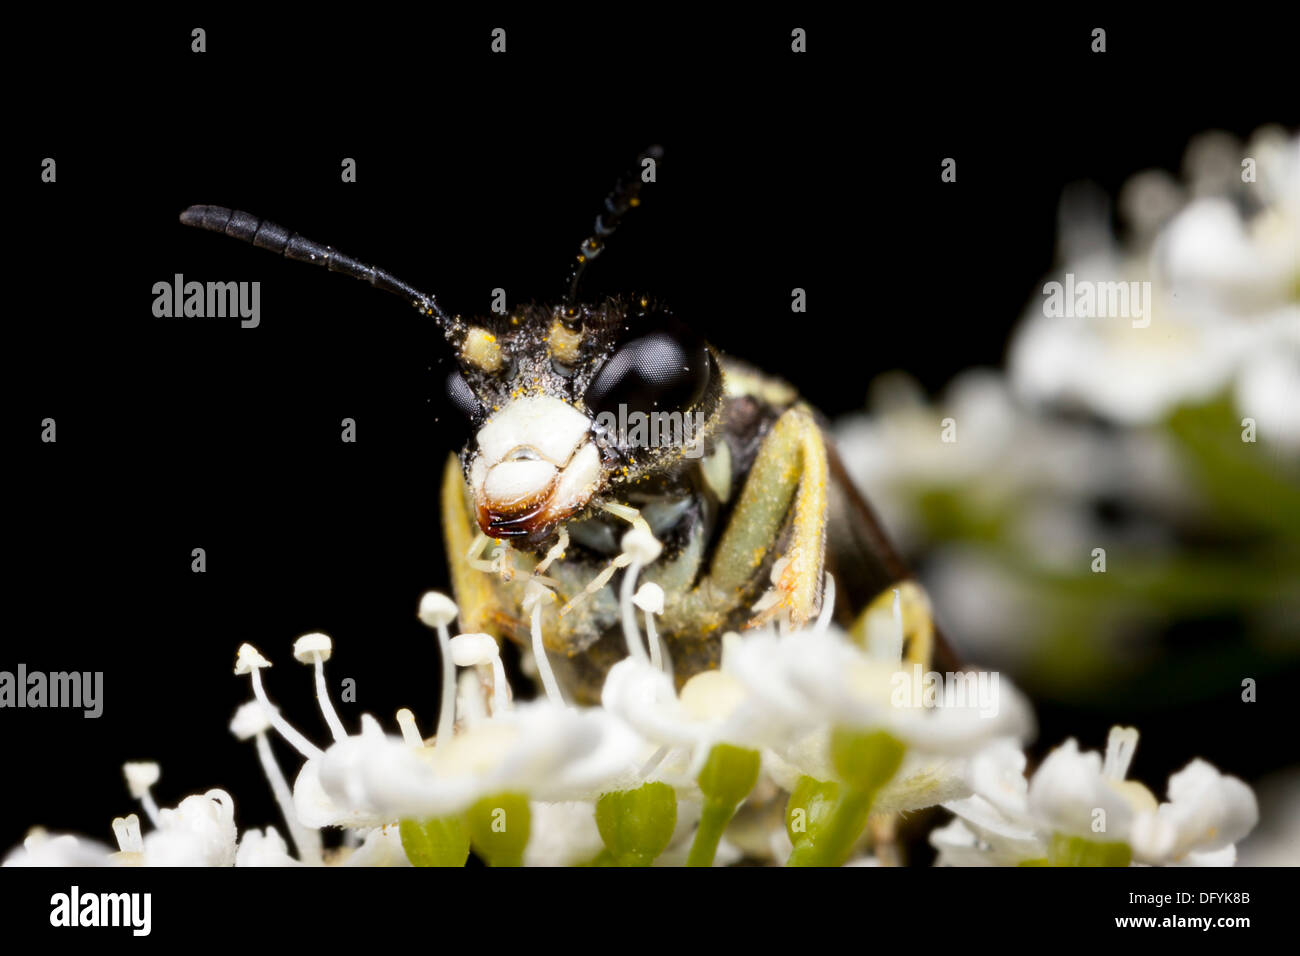 Sharp-nosed bee or wasp Stock Photo